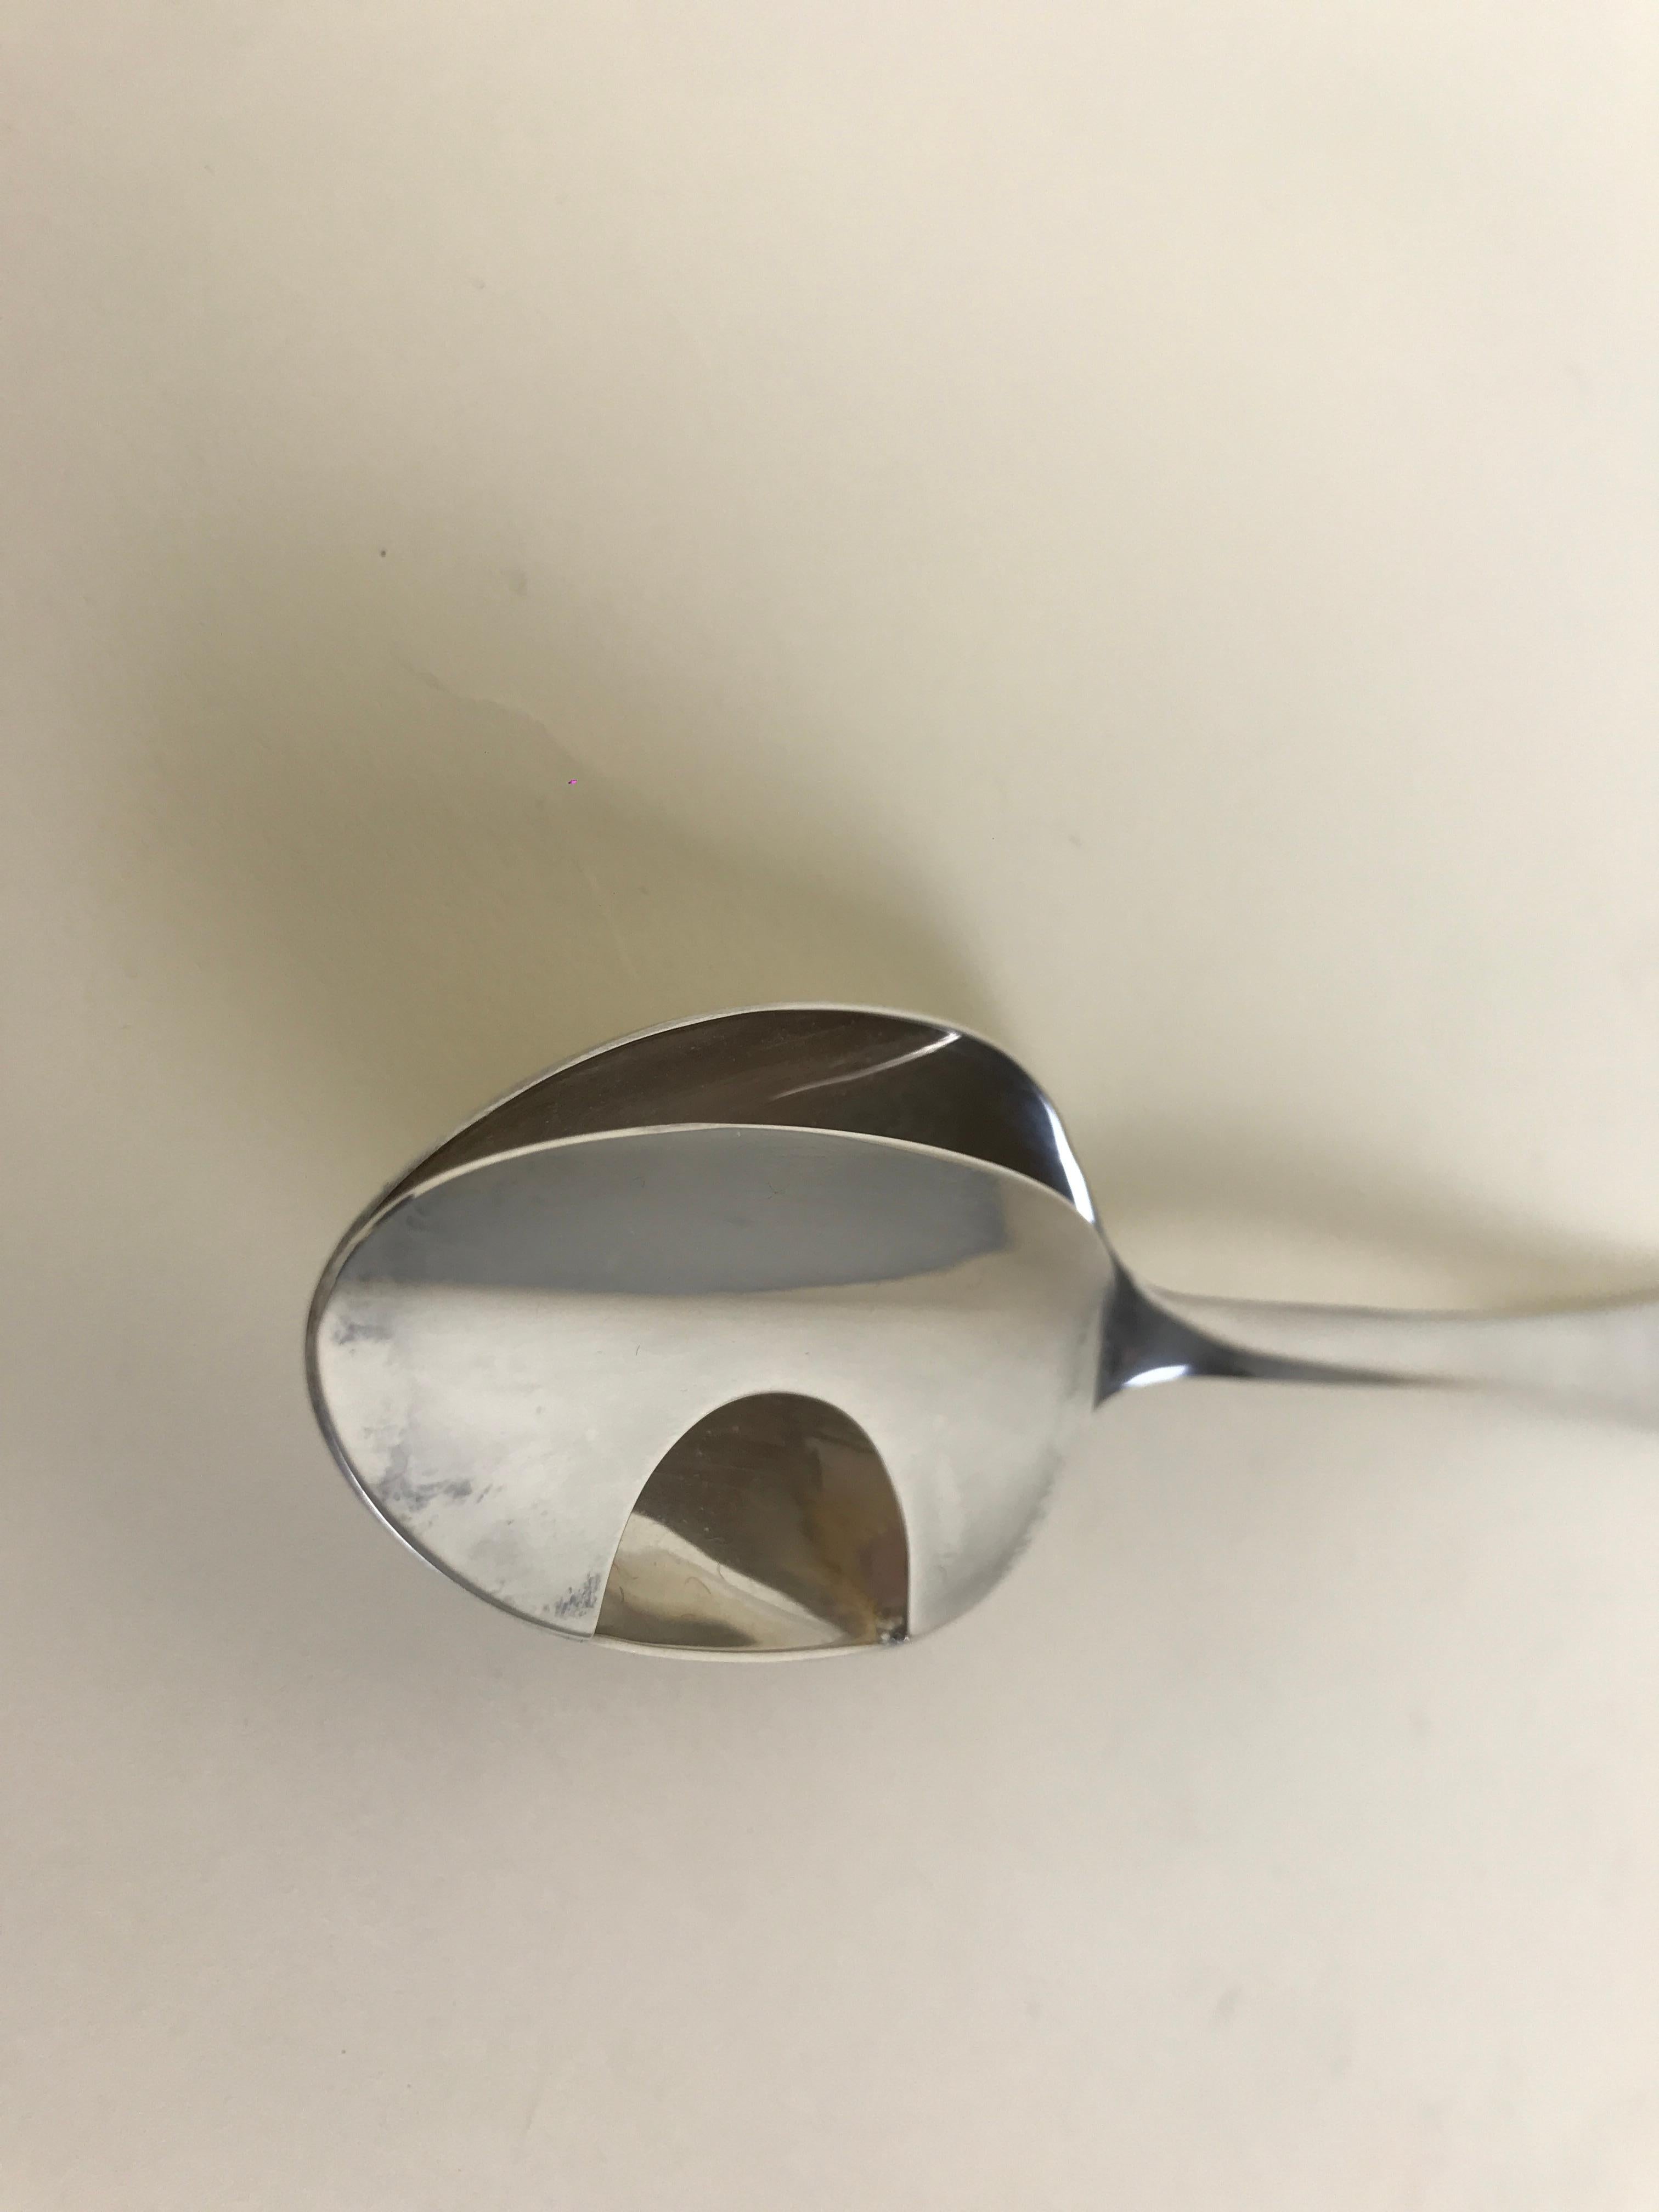 Victorian 1970s Reissued America Silver Plated Master Mustache Spoon by Reed & Barton For Sale